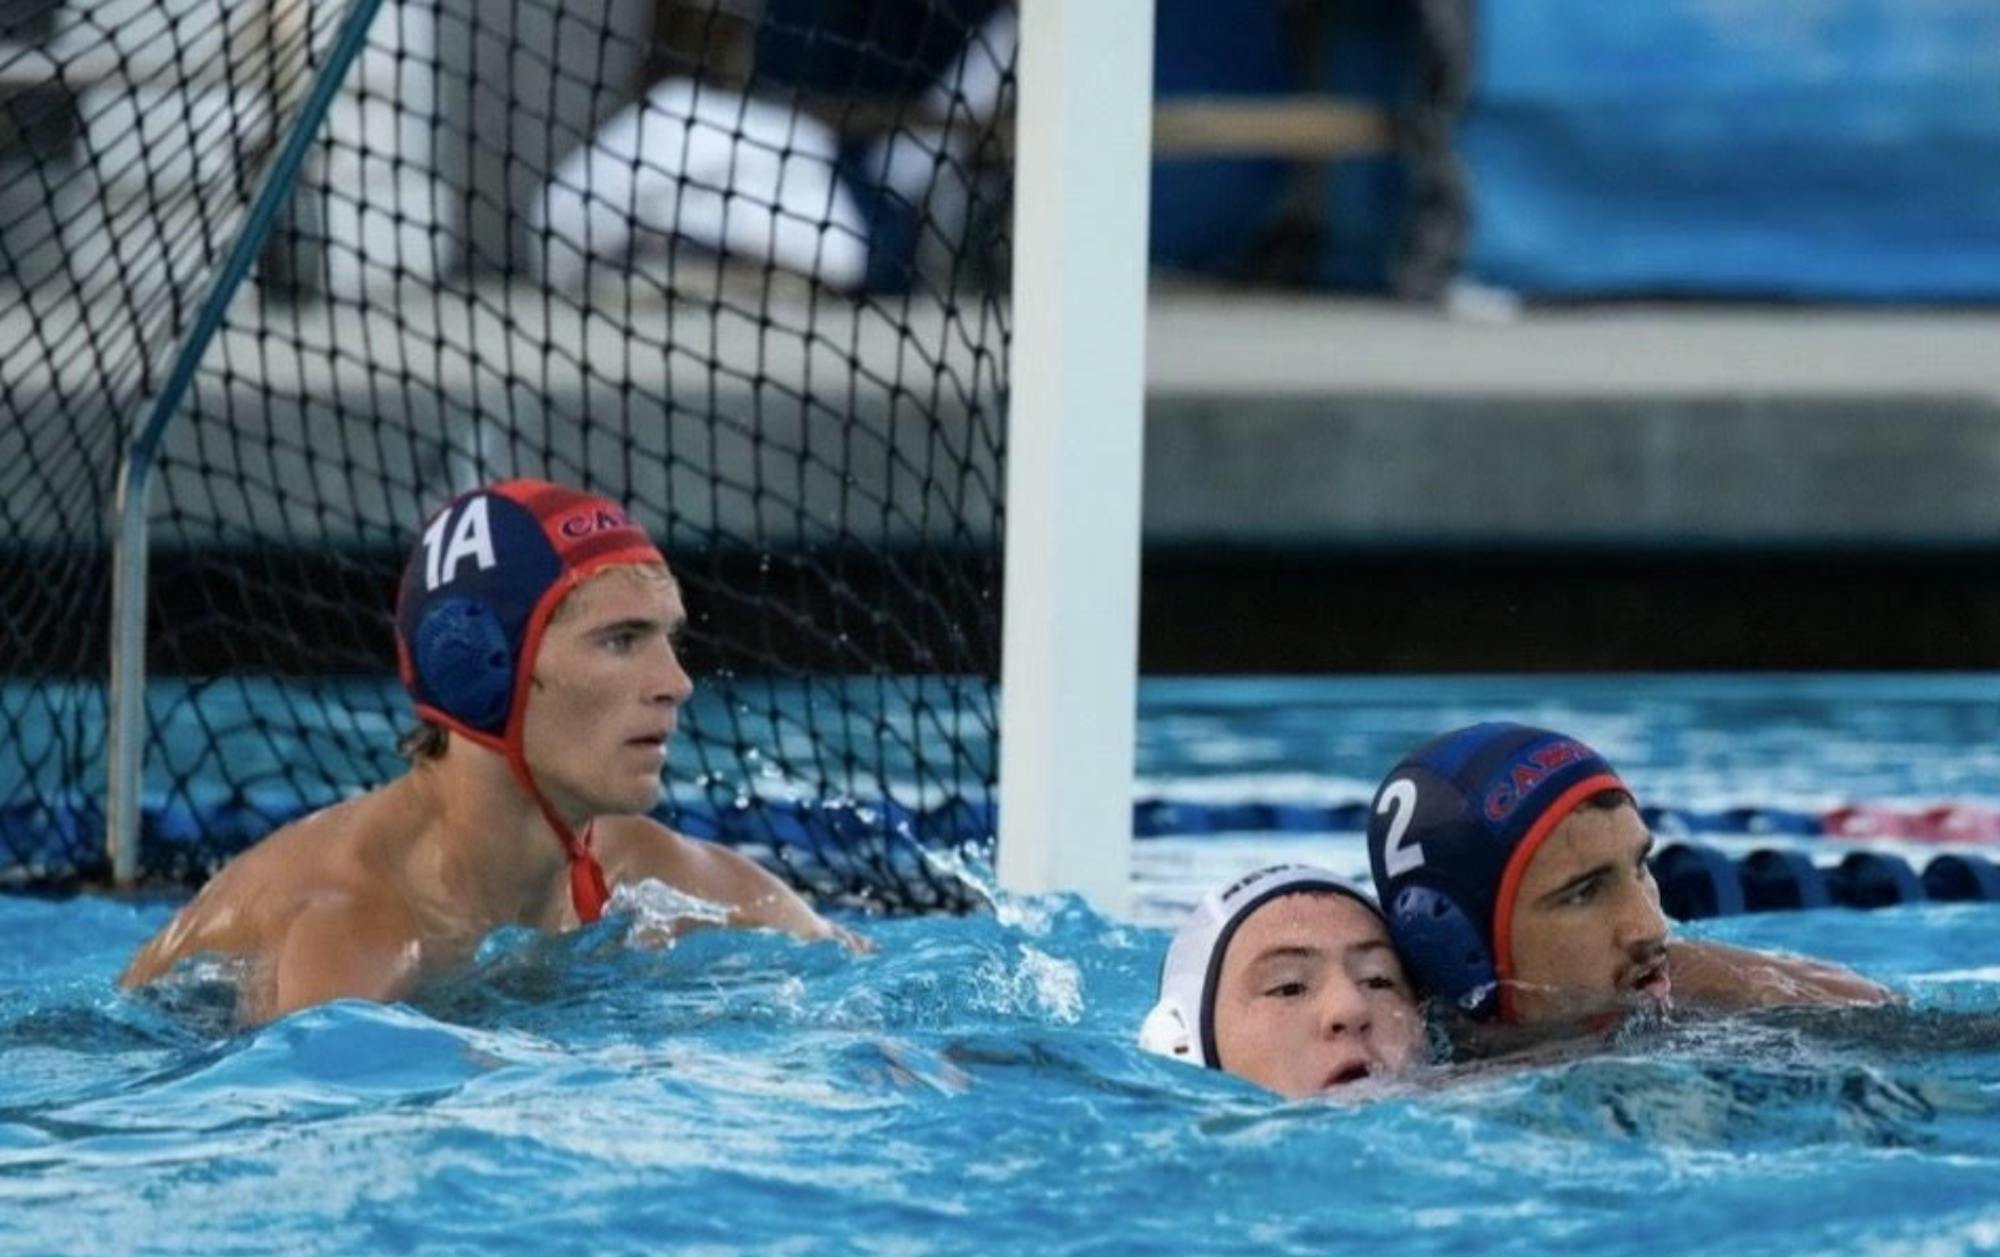 A man wearing a blue cap in the goal in the water waiting for a shot.